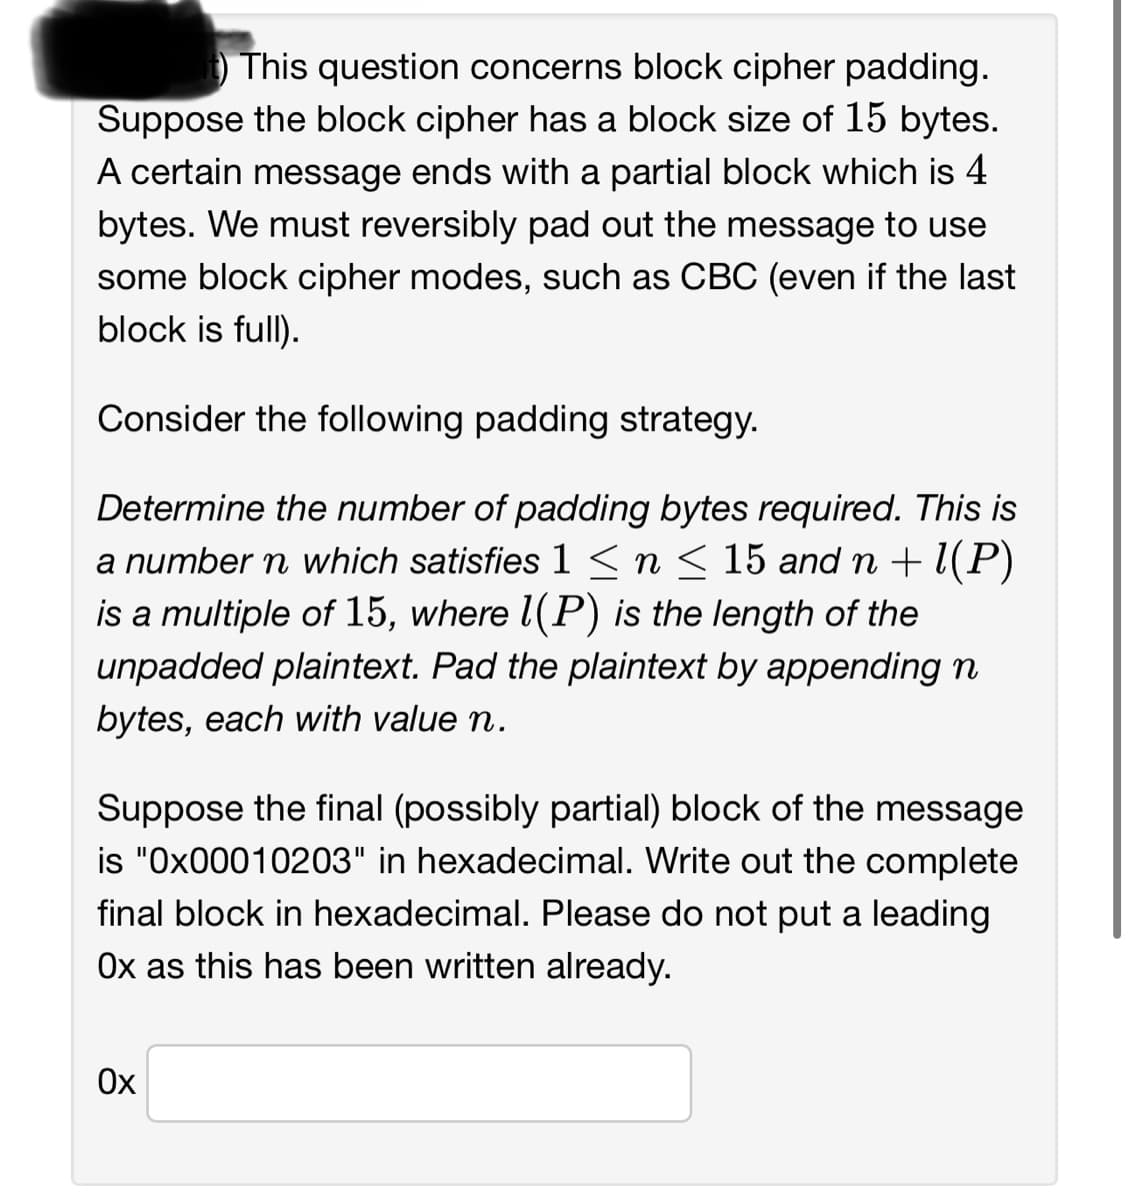 This question concerns block cipher padding.
Suppose the block cipher has a block size of 15 bytes.
A certain message ends with a partial block which is 4
bytes. We must reversibly pad out the message to use
some block cipher modes, such as CBC (even if the last
block is full).
Consider the following padding strategy.
Determine the number of padding bytes required. This is
a number n which satisfies 1 ≤ n ≤ 15 and n + 1(P)
is a multiple of 15, where 1(P) is the length of the
unpadded plaintext. Pad the plaintext by appending n
bytes, each with value n.
Suppose the final (possibly partial) block of the message
is "0x00010203" in hexadecimal. Write out the complete
final block in hexadecimal. Please do not put a leading
Ox as this has been written already.
Ox